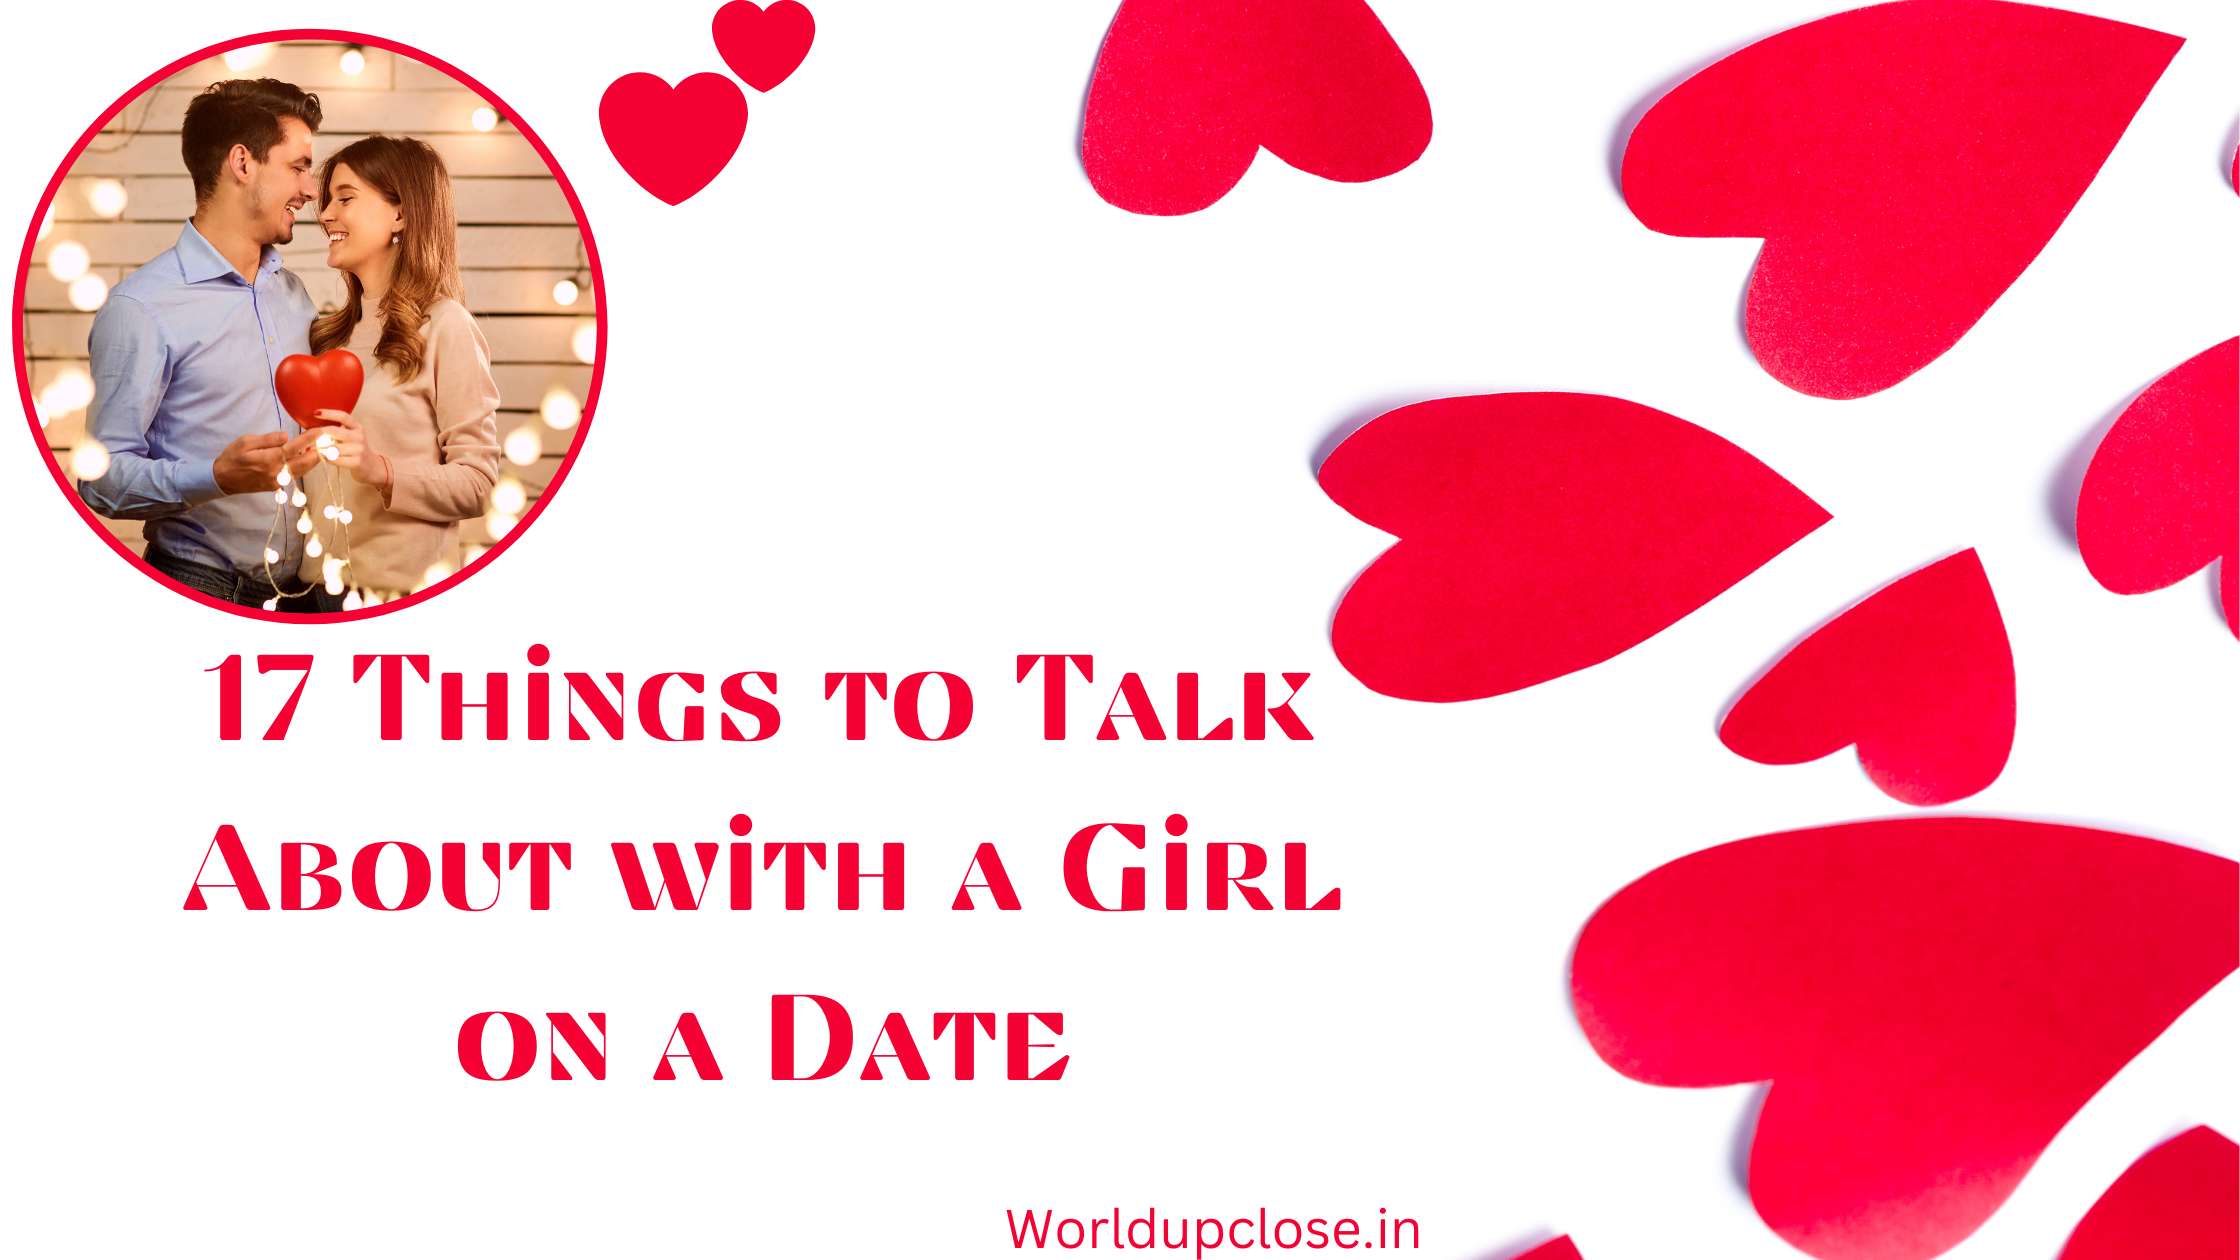 17 Things to Talk About with a Girl on a Date 44